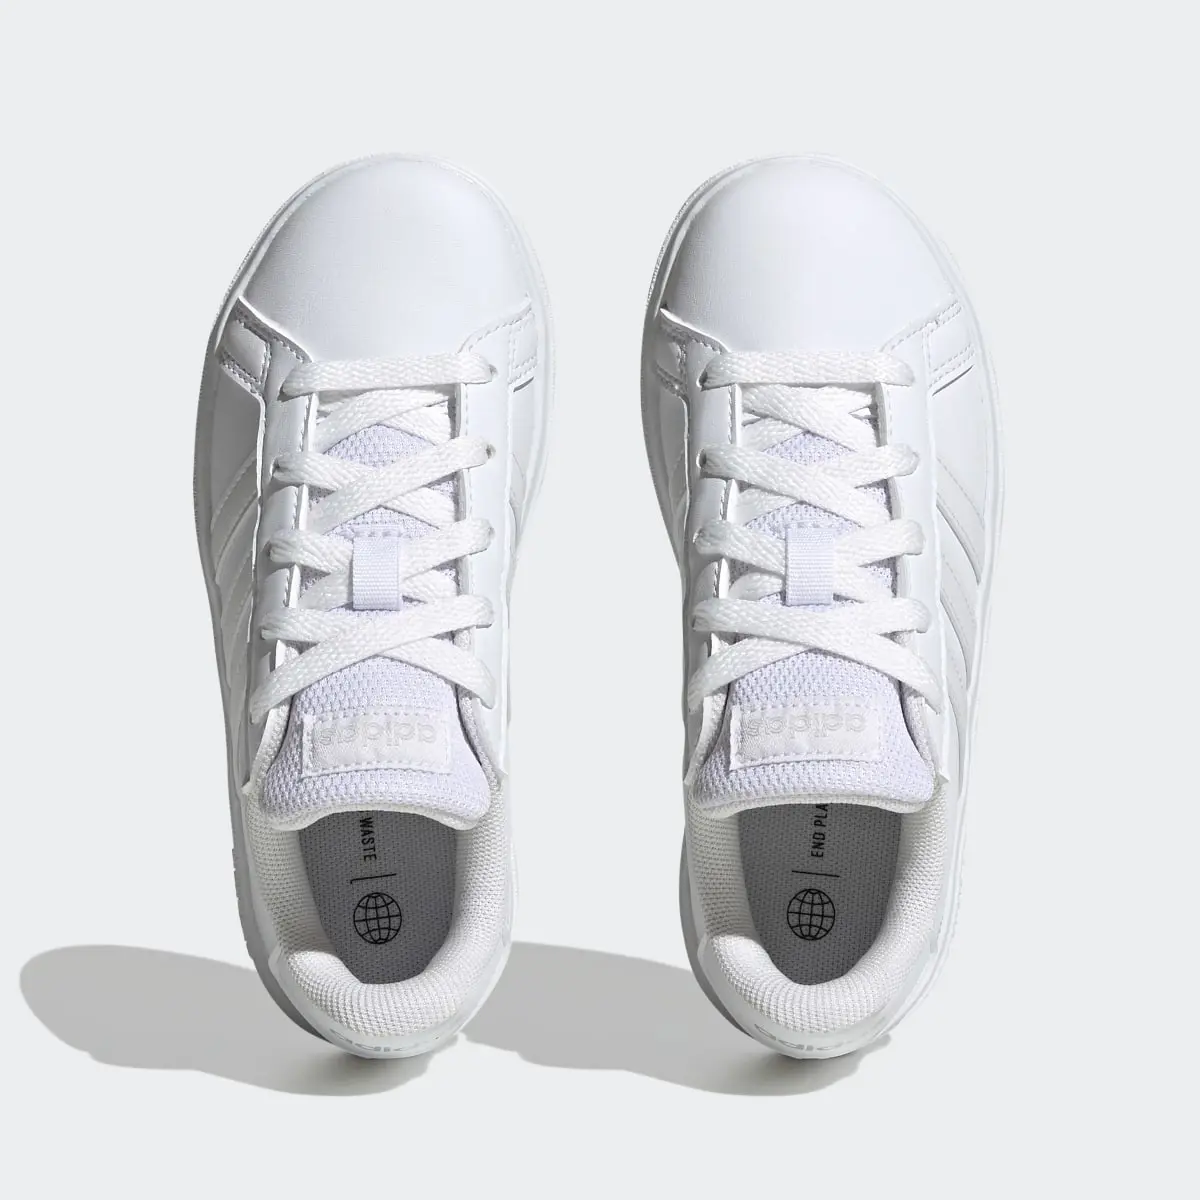 Adidas Buty Grand Court Lifestyle Tennis Lace-Up. 3